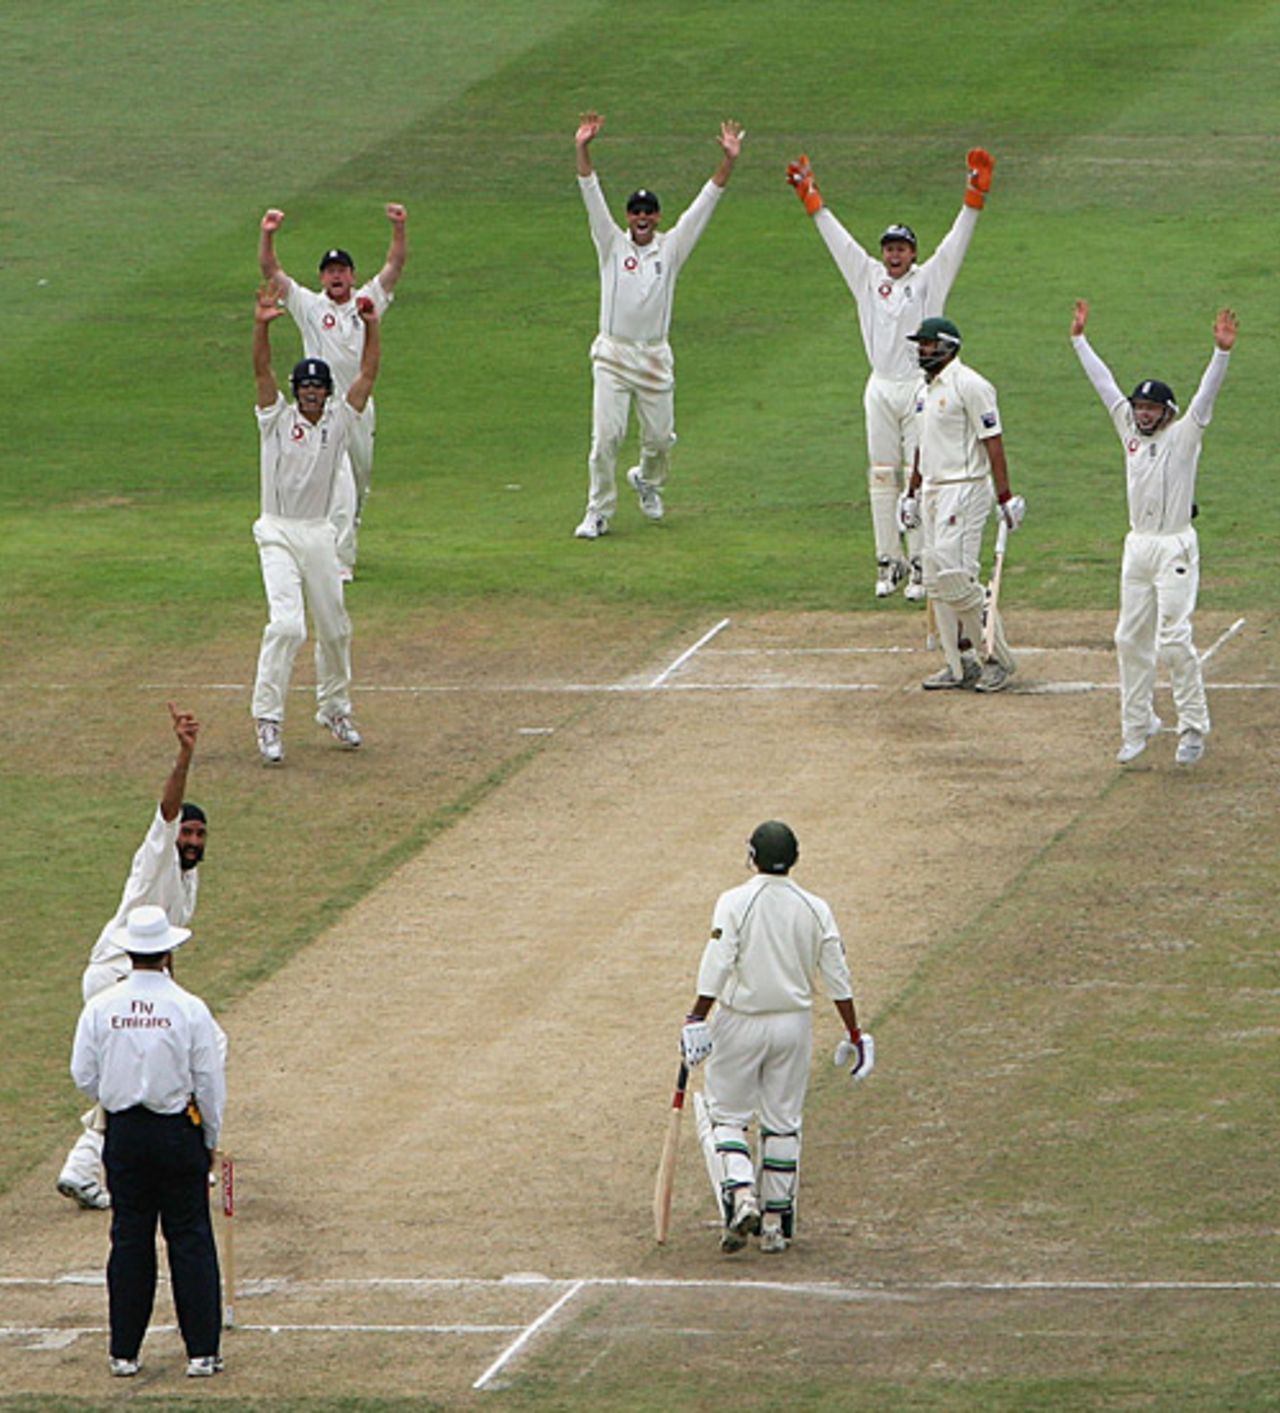 England successfully appeal for Inzamam-ul-Haq's wicket, England v Pakistan, 2nd Test, Old Trafford, July 29, 2006